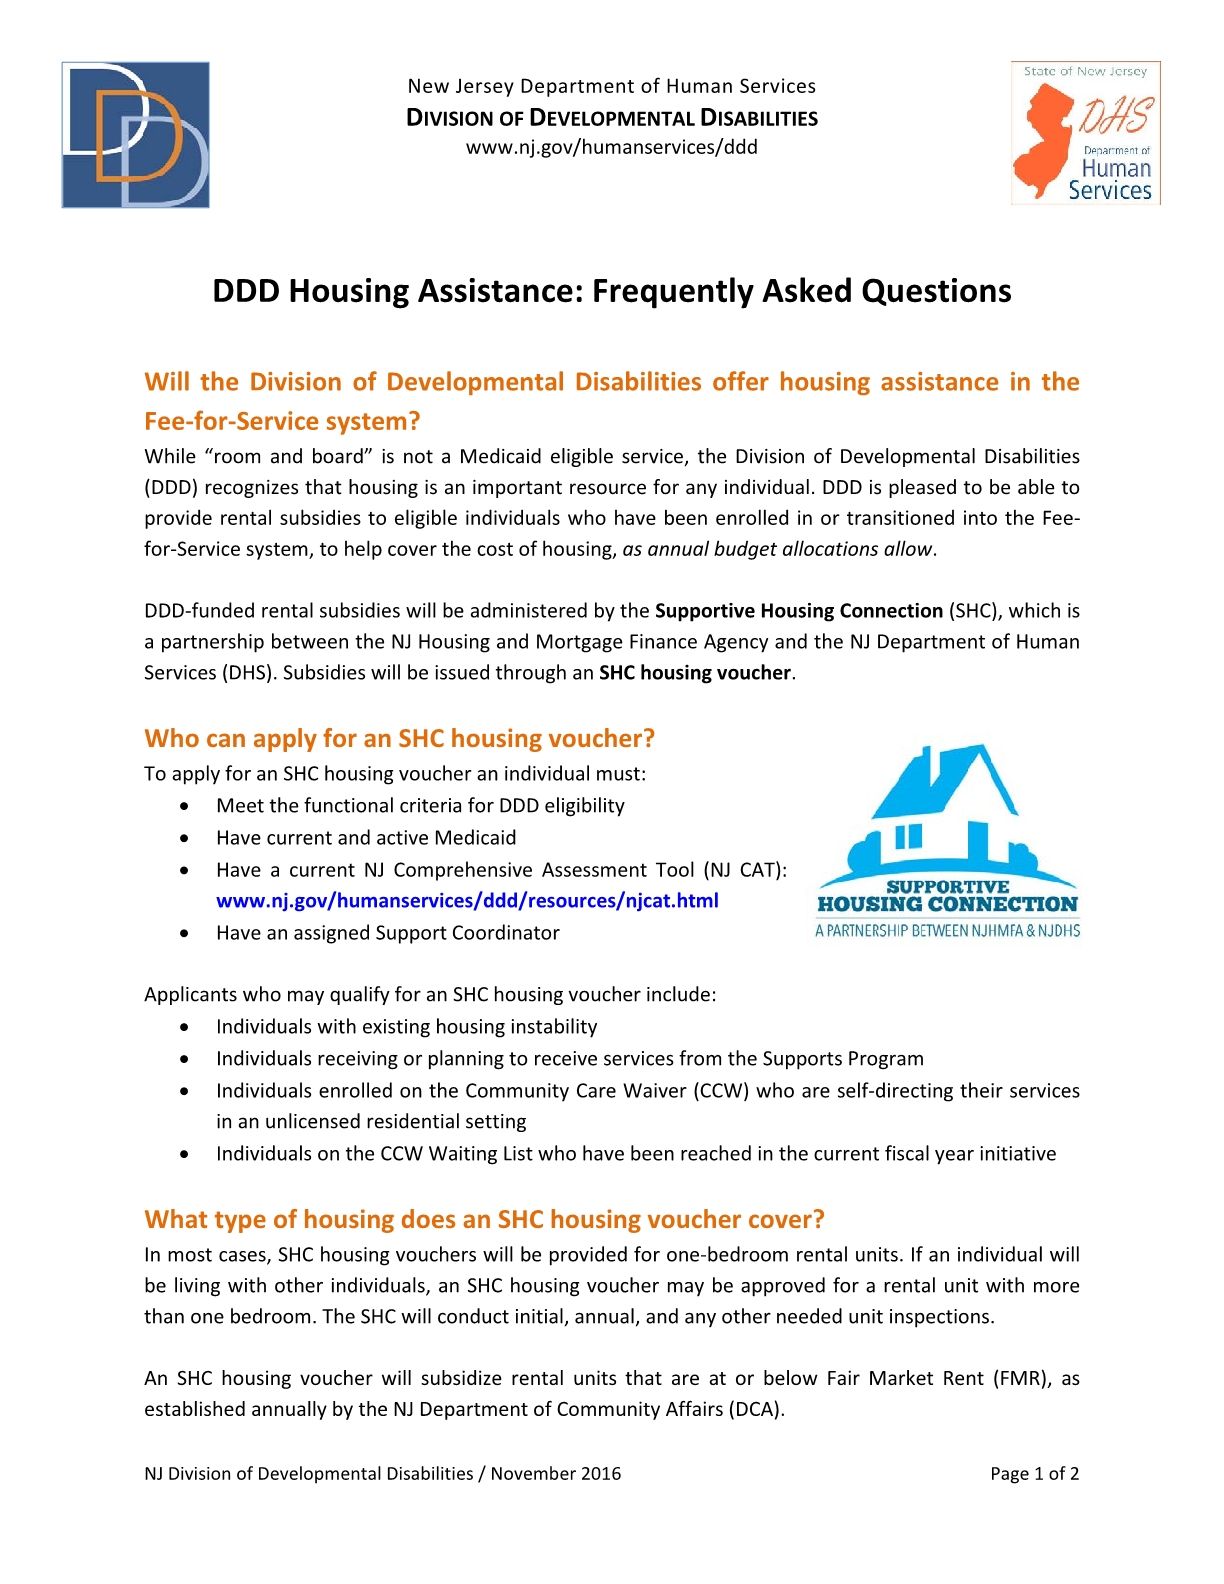 DDD Housing Assistance: Frequently Asked Questions